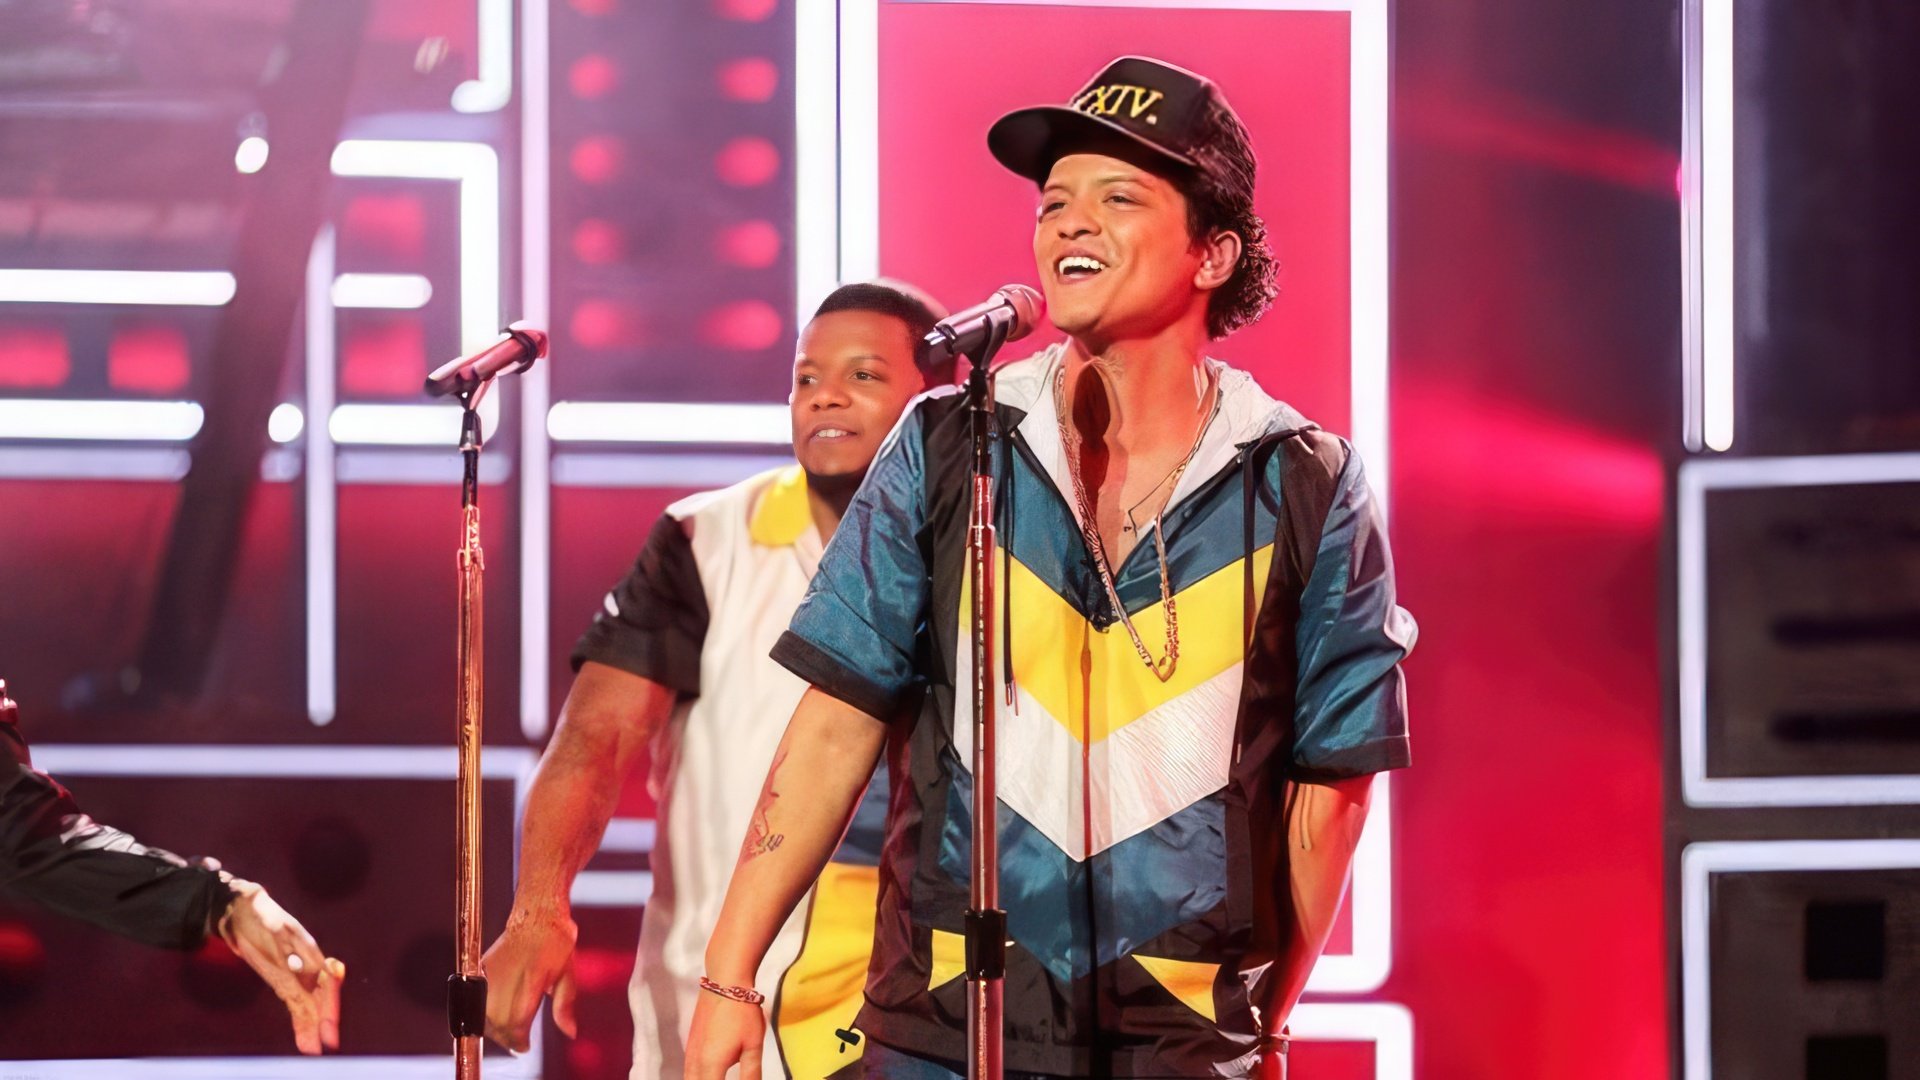 Bruno Mars is sincerely nostalgic for the ’80s